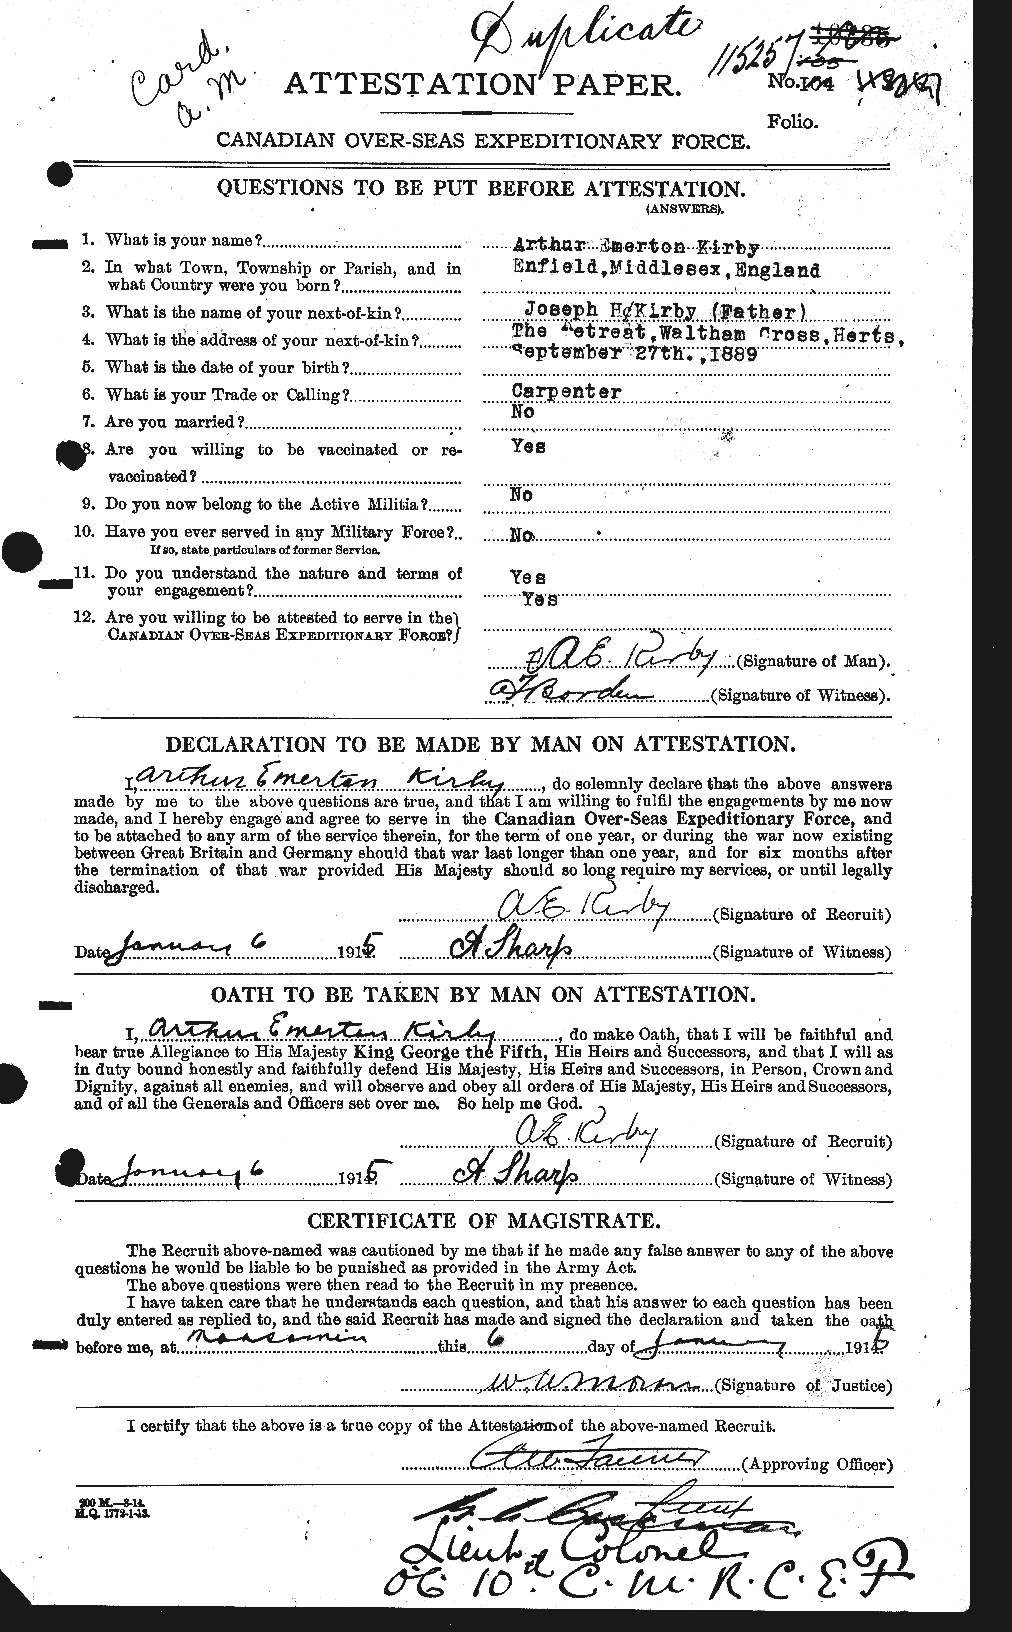 Personnel Records of the First World War - CEF 437155a